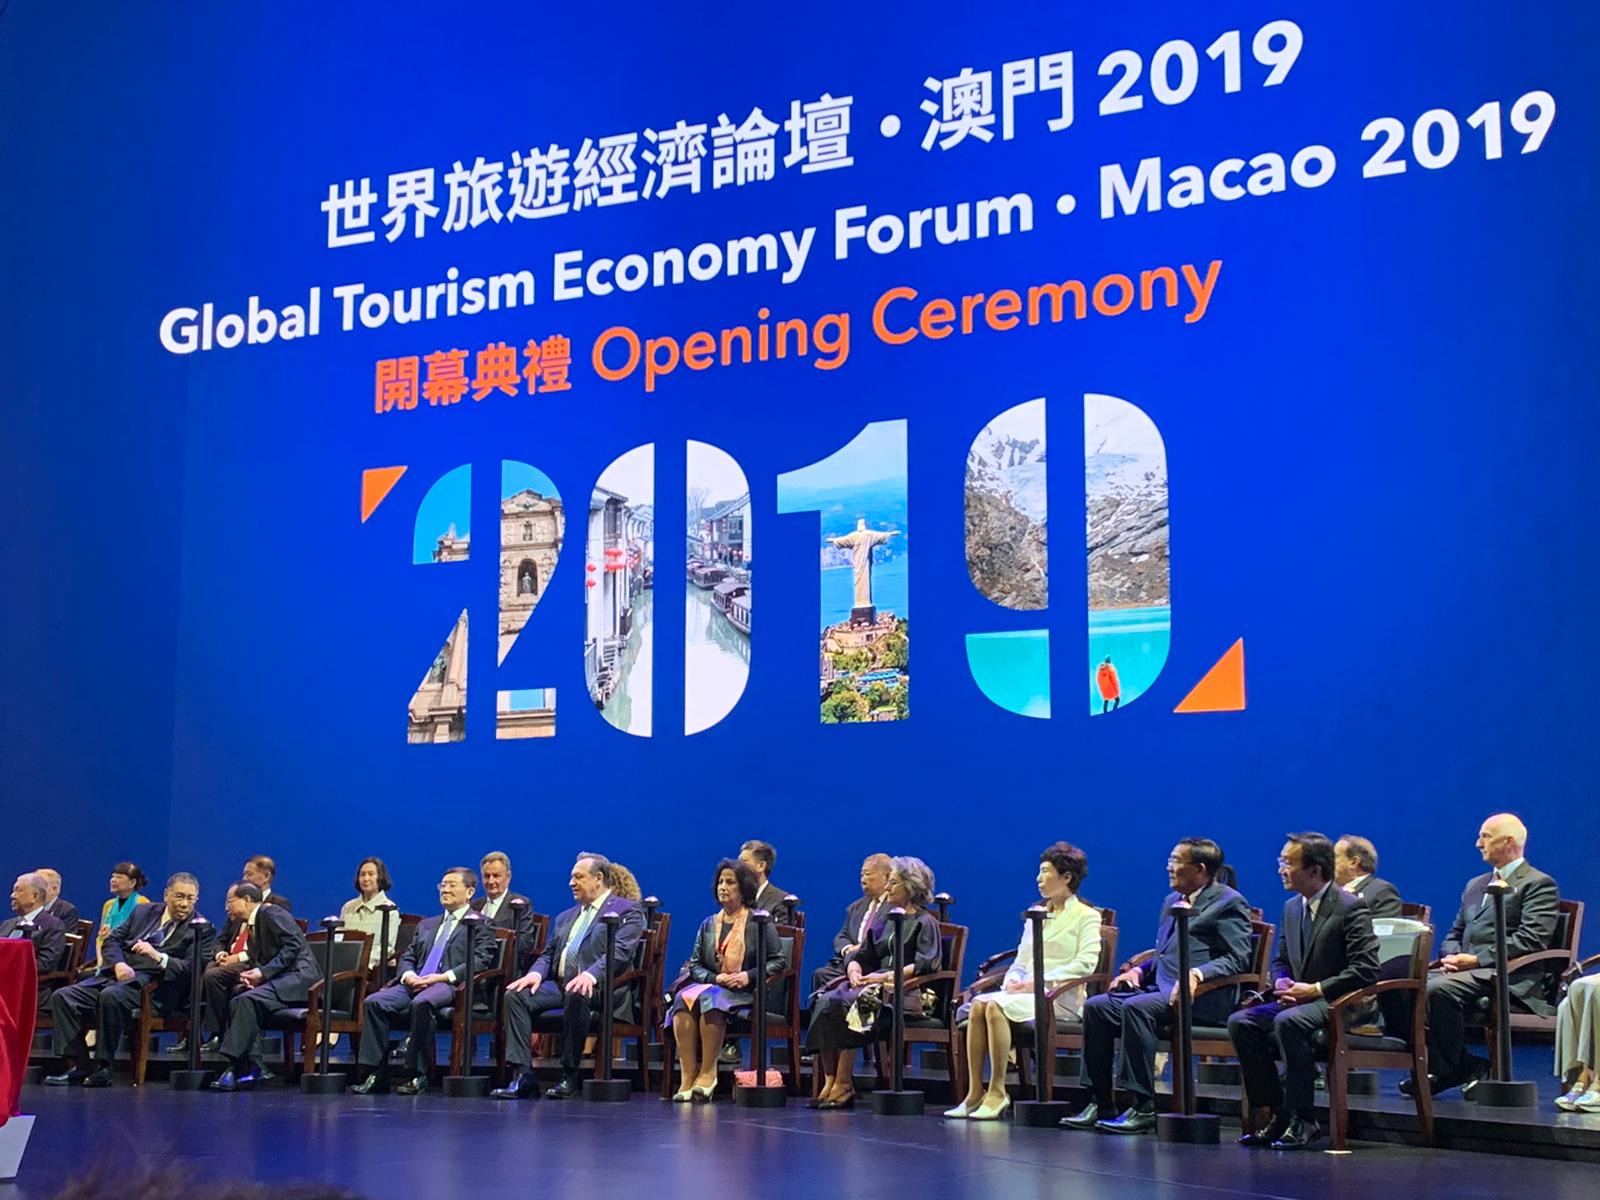 Part of The Global Tourism Economy Forum 2019